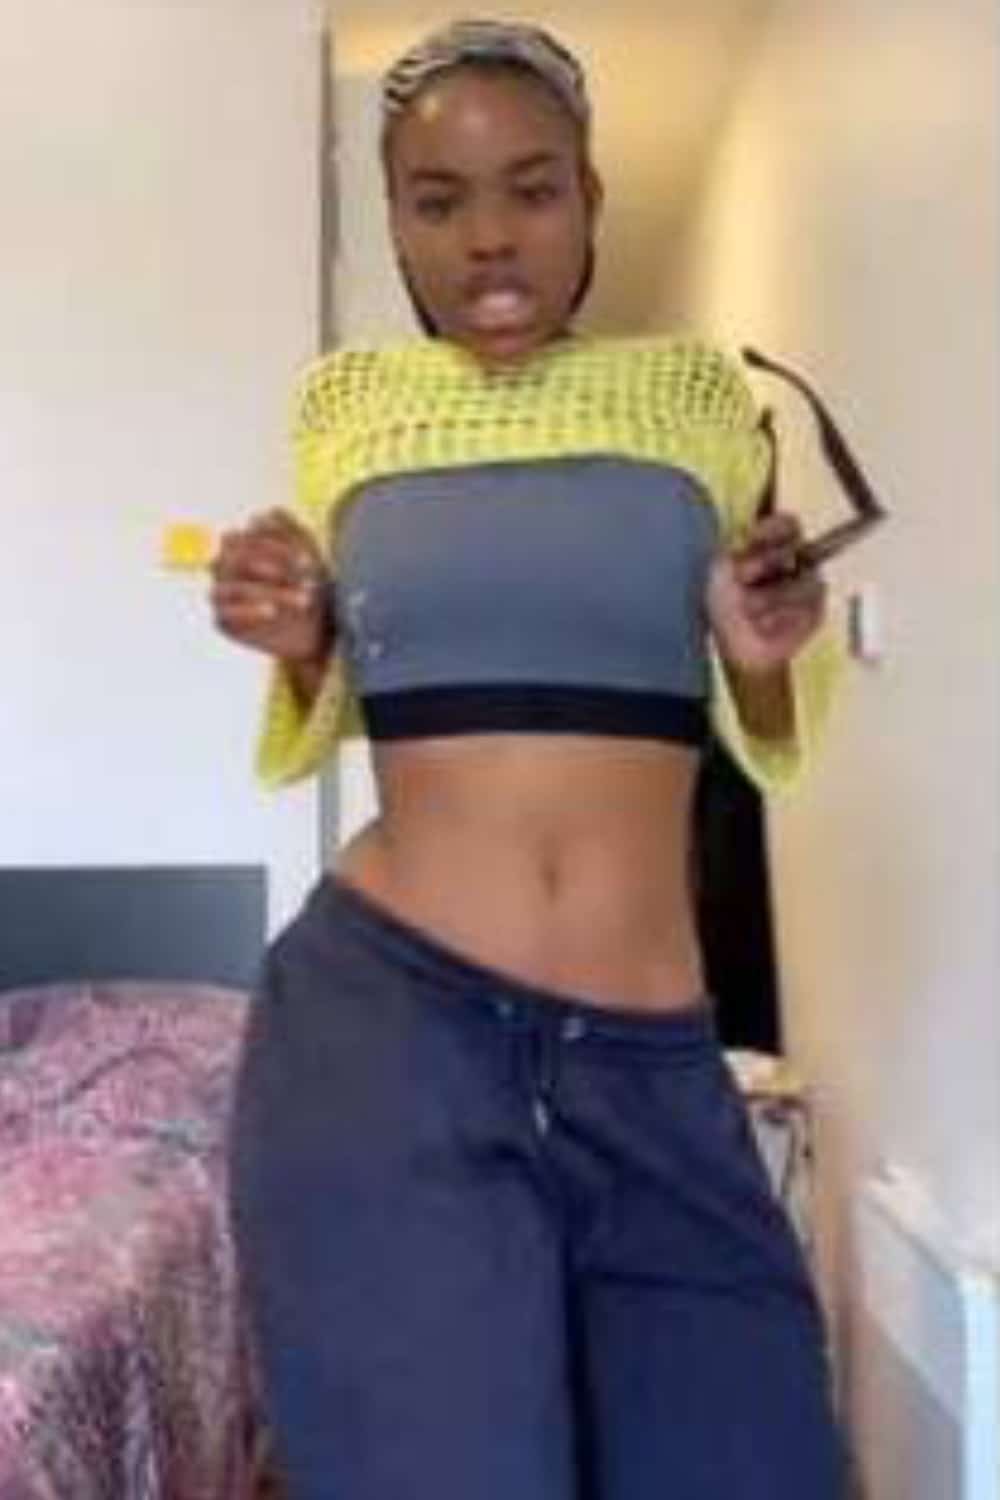 "Wen Rema scream 'see body o' na u hin get for mind" - Reactions as Nigerian lady with tiny waist dances to Rema's 'Charm' takes social media by storm (Video)